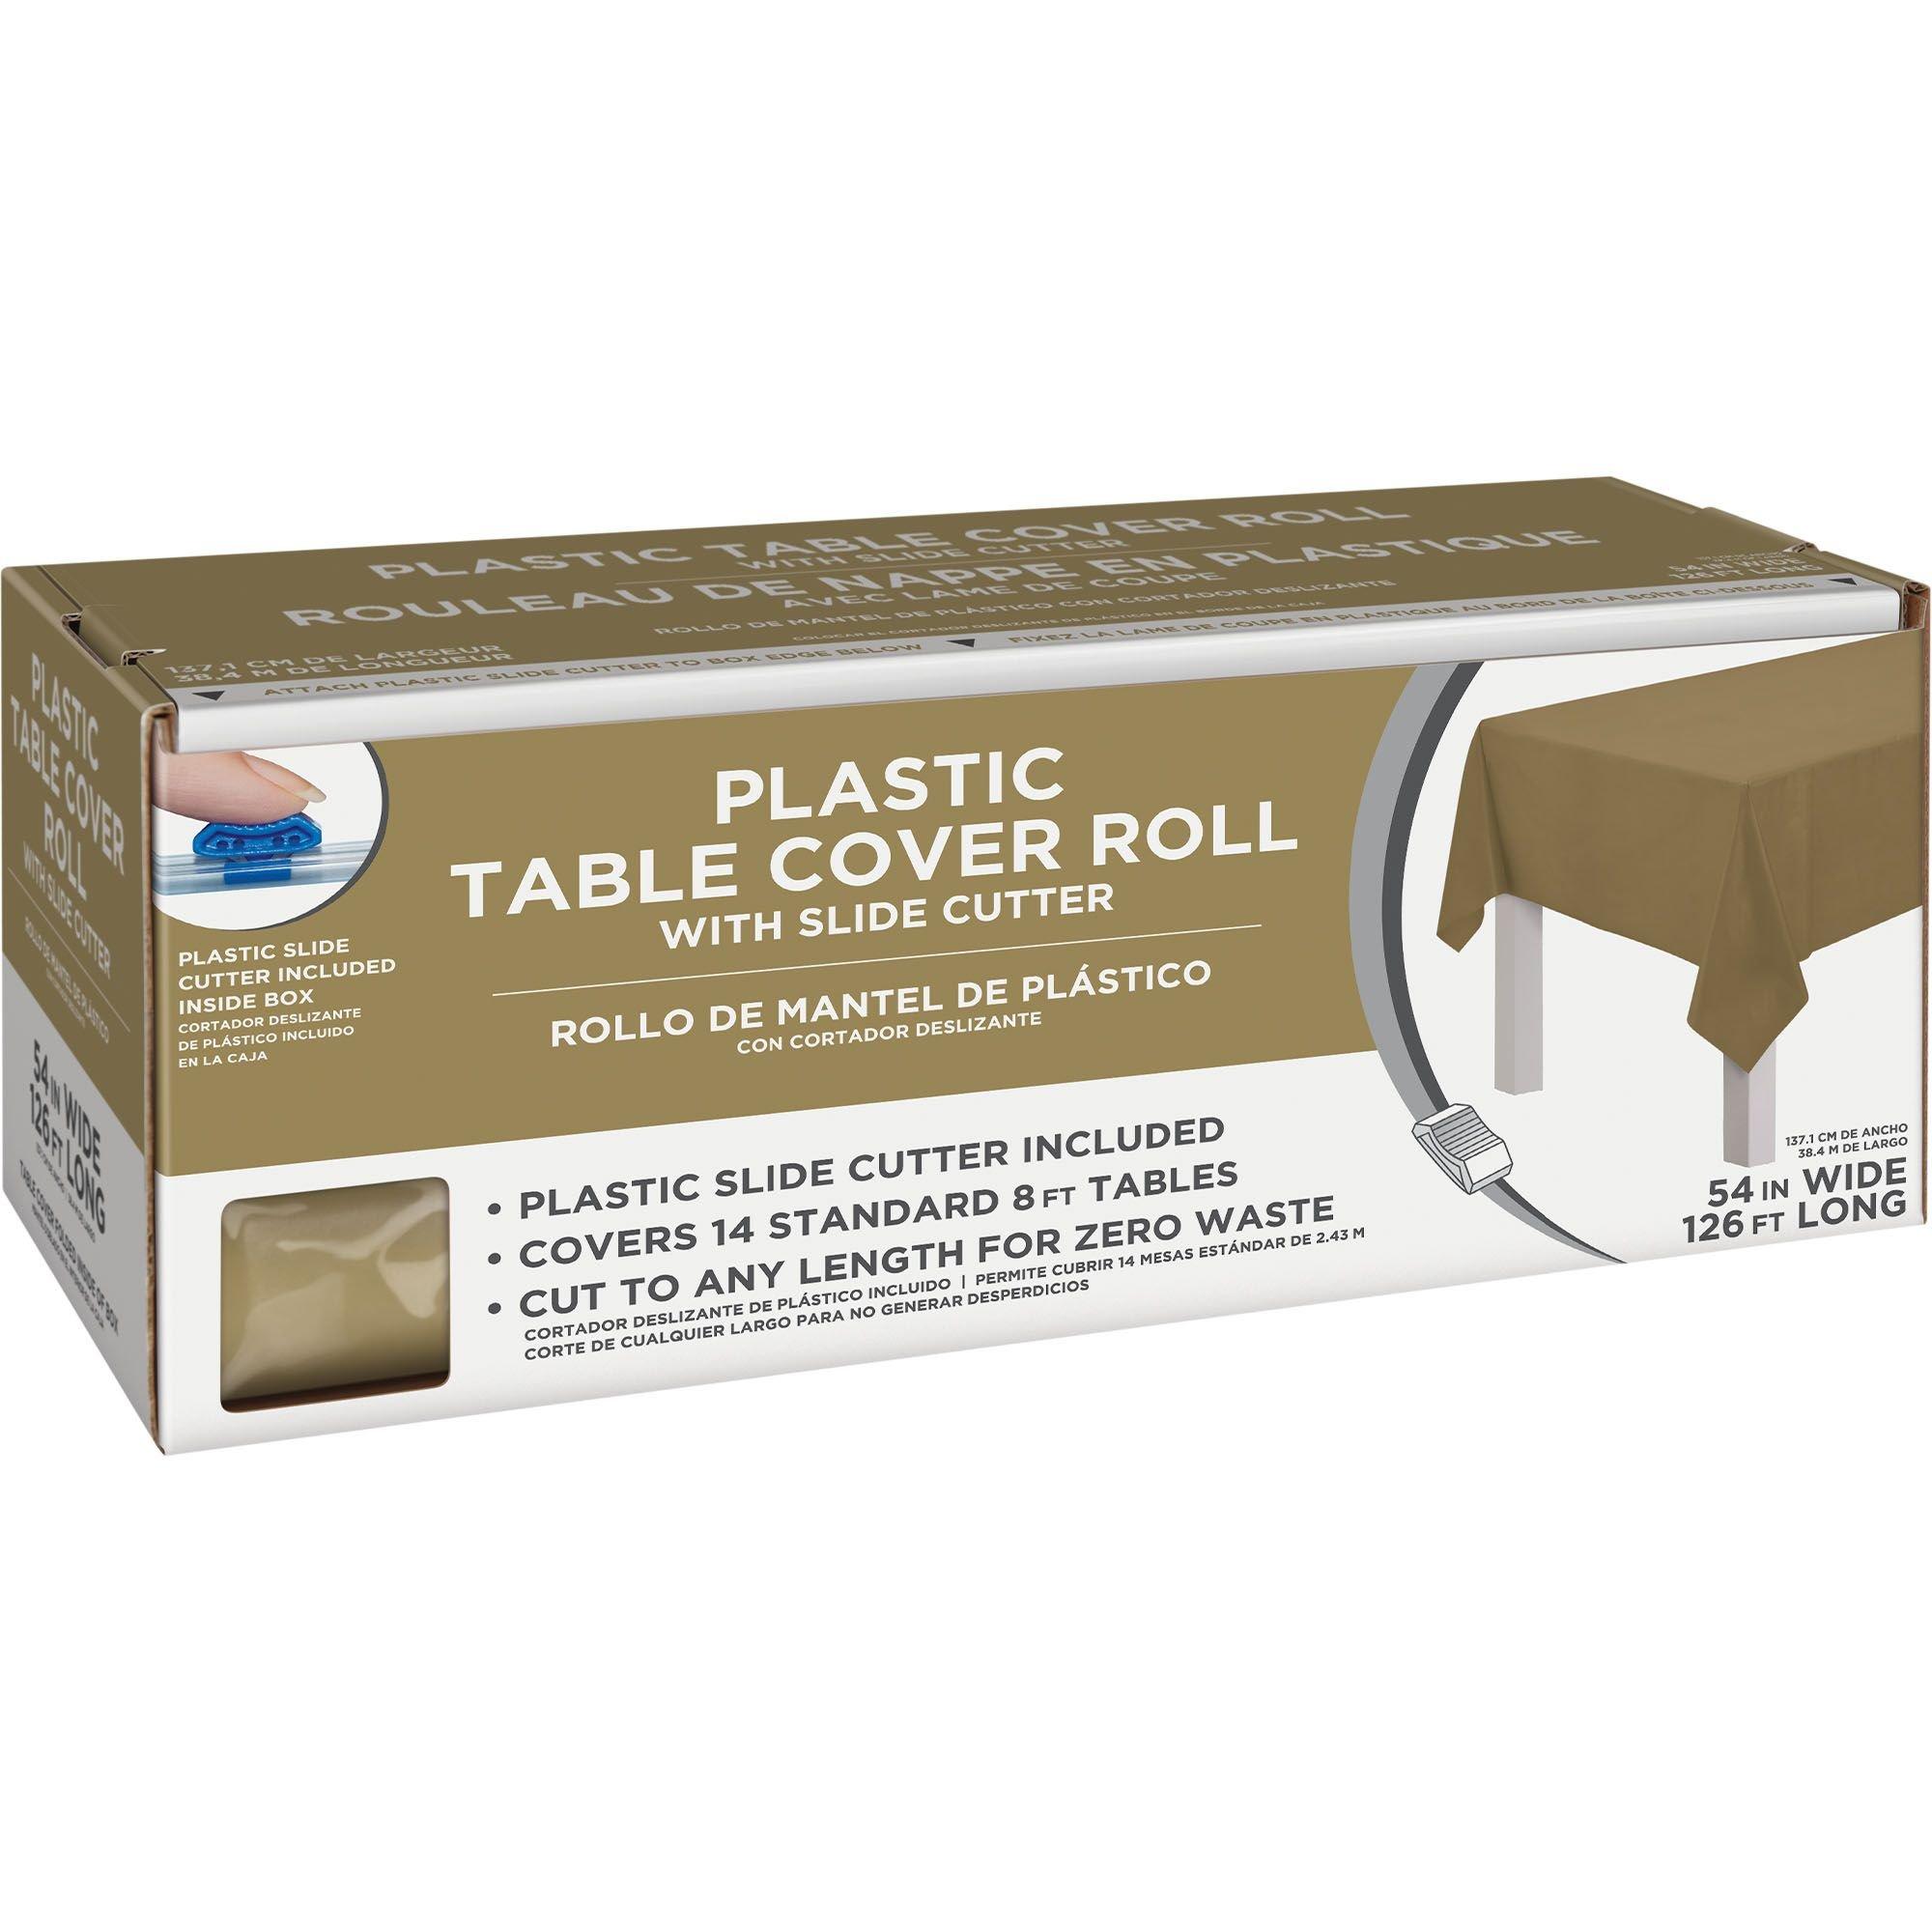 Amscan Gold Plastic Table Cover Roll with Slide Cutter, 54in x 126ft